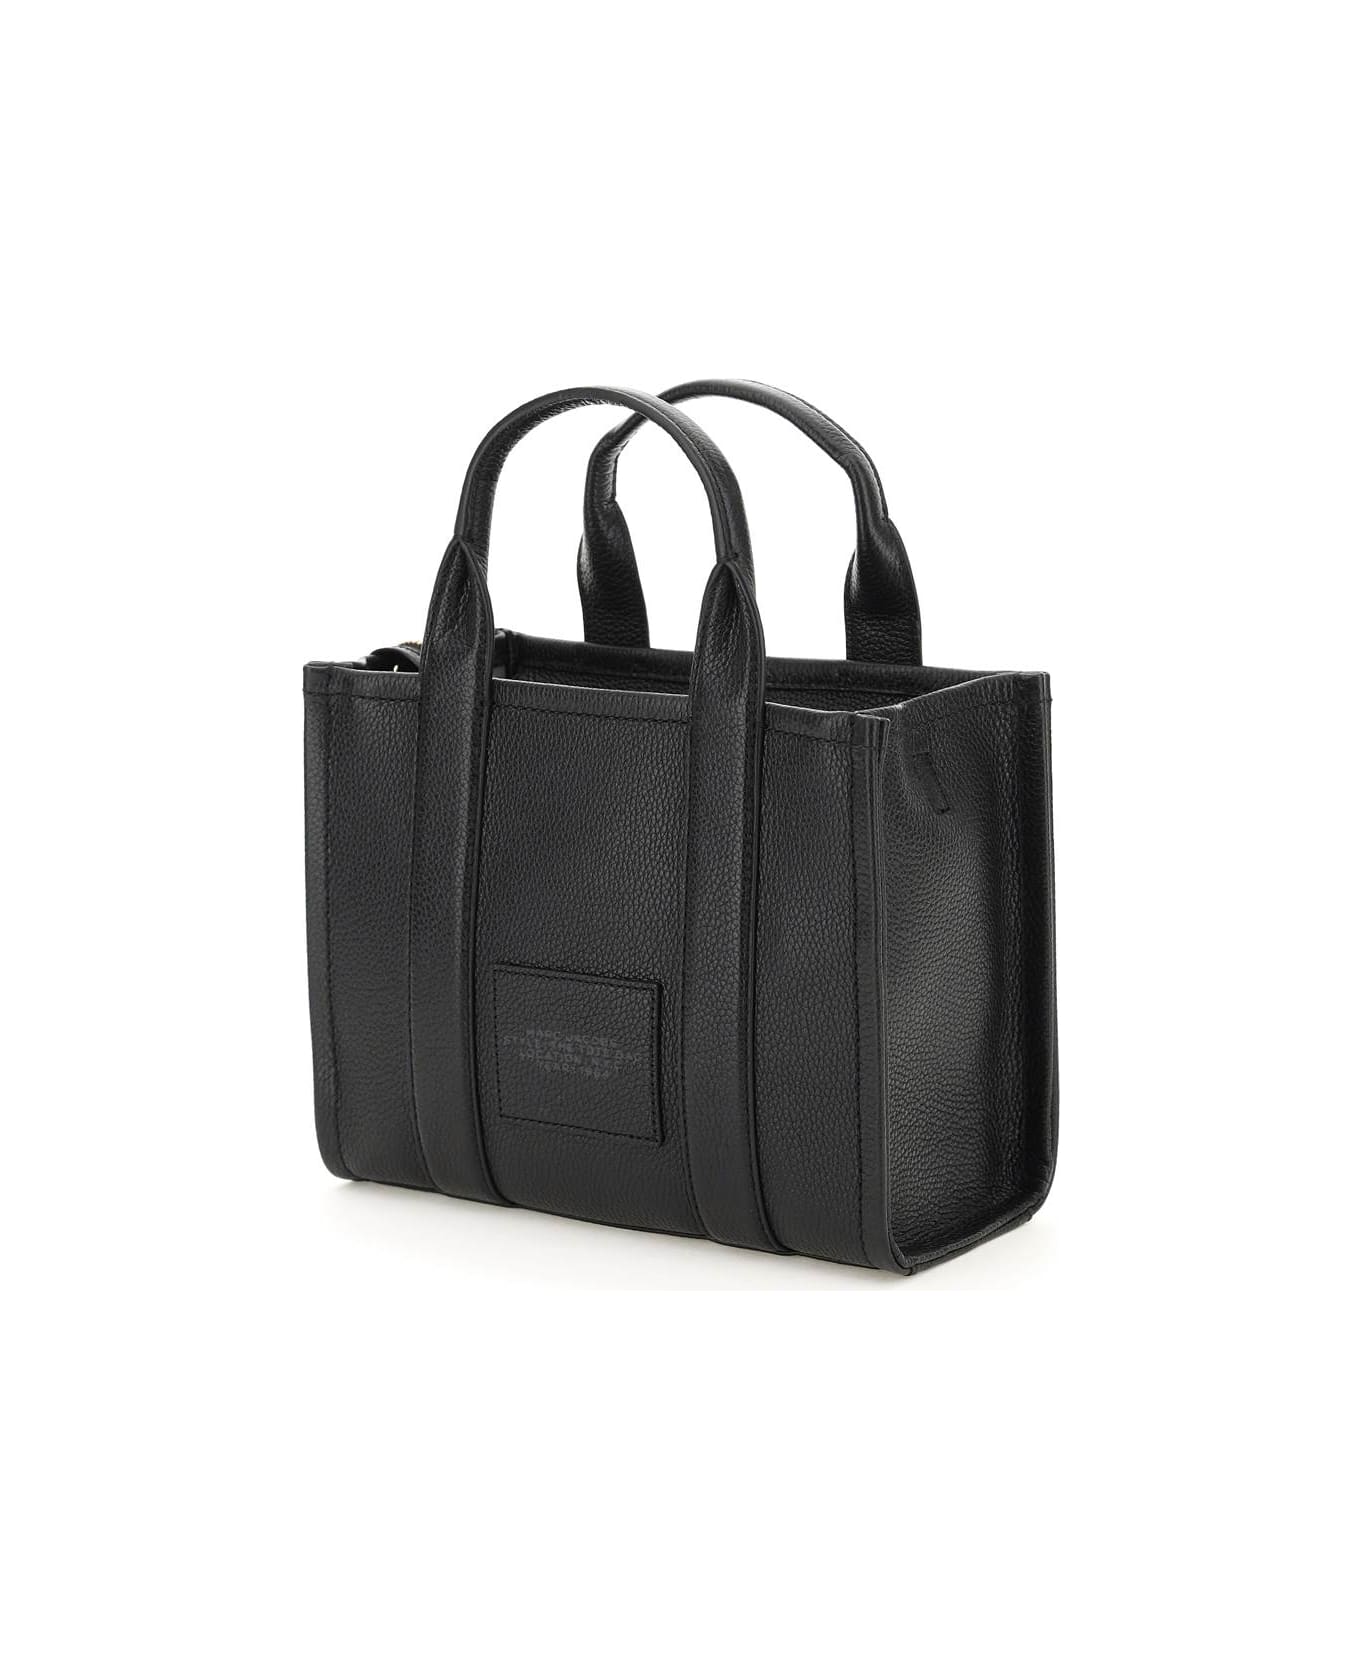 Marc Jacobs The Leather Small Tote Bag - BLACK (Black) トートバッグ